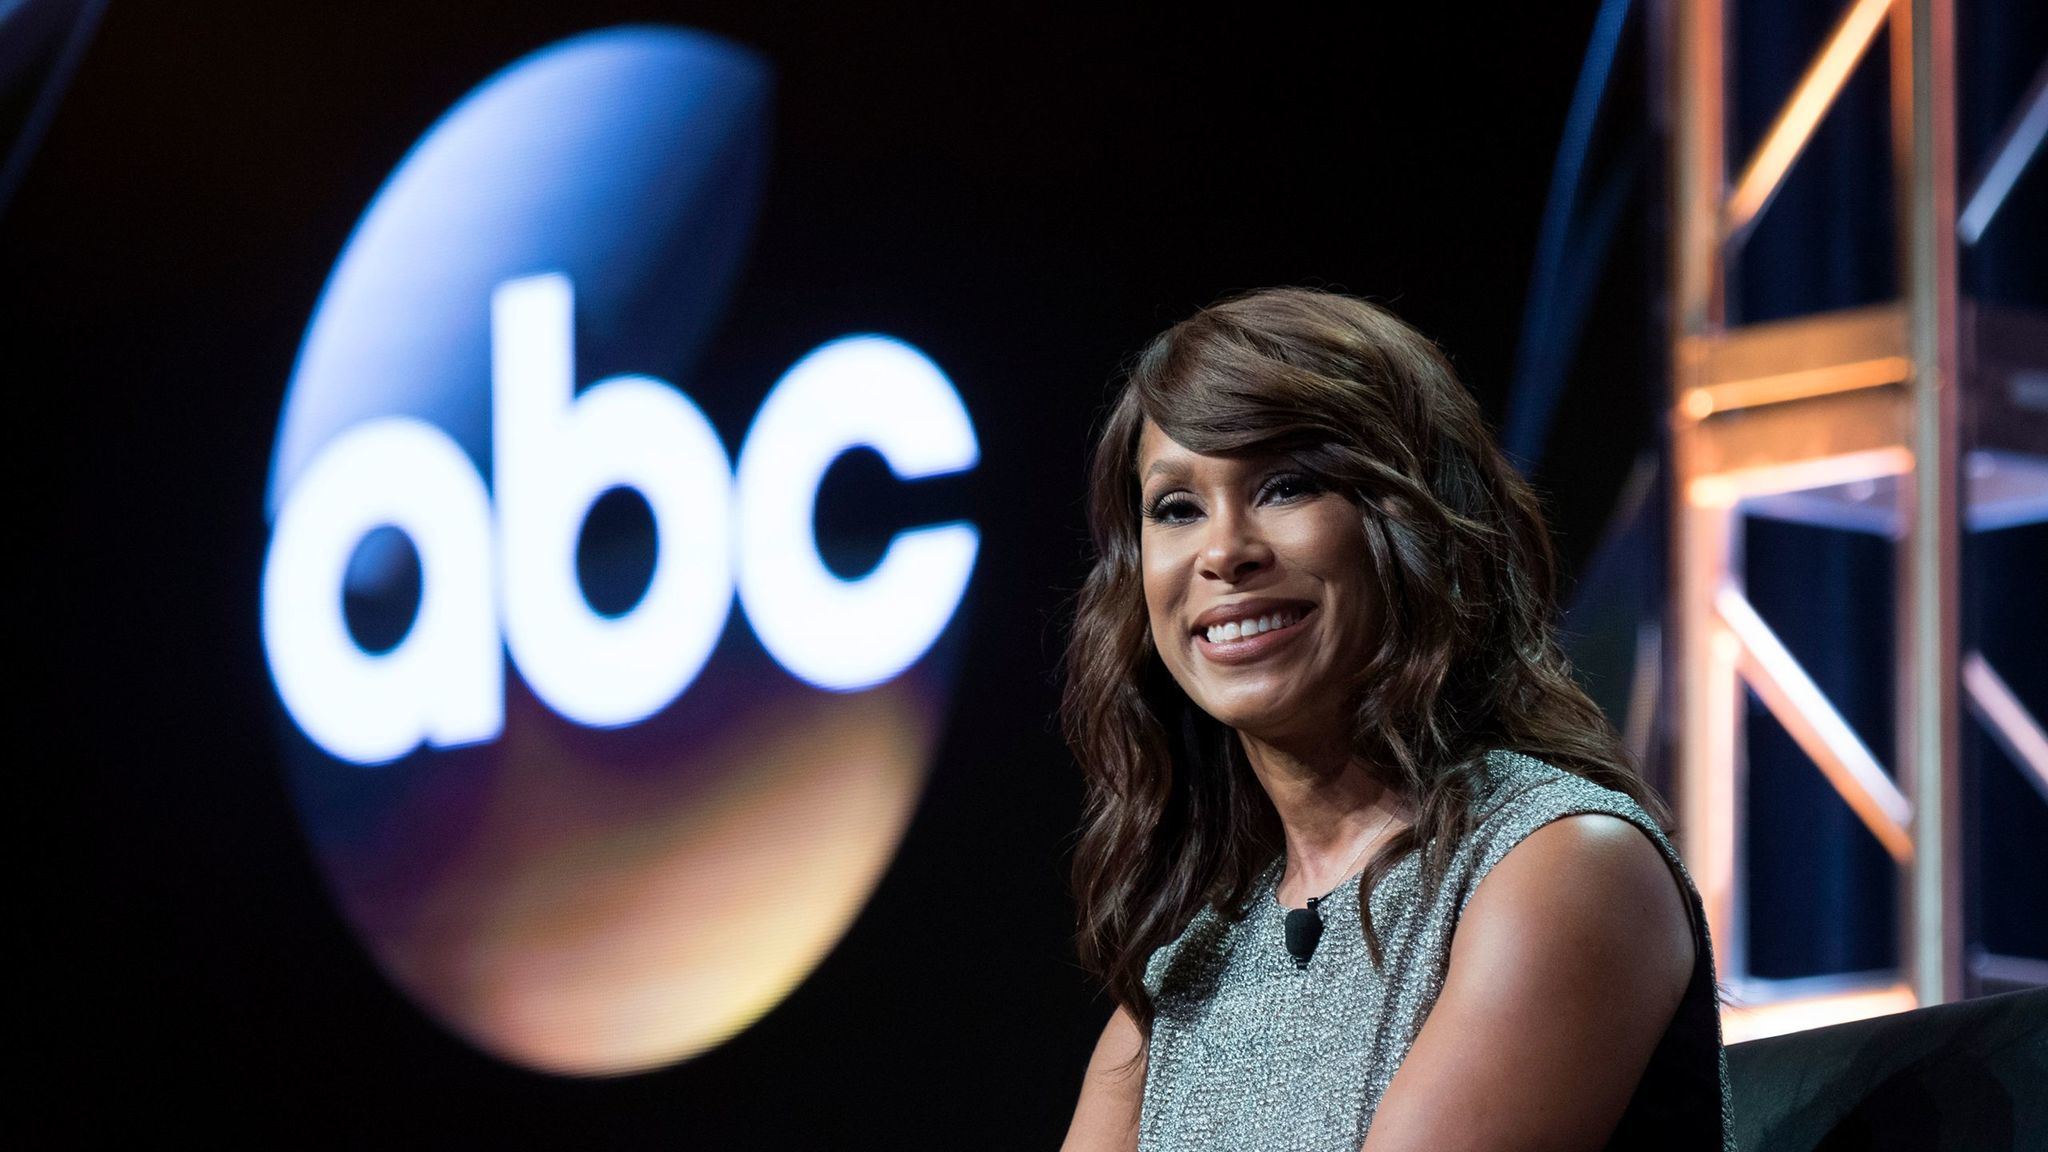 ABC entertainment President Channing Dungey fields questions during the Television Critics Assn. press tour at the Beverly Hilton in Beverly Hills. (Image Group LA / ABC)